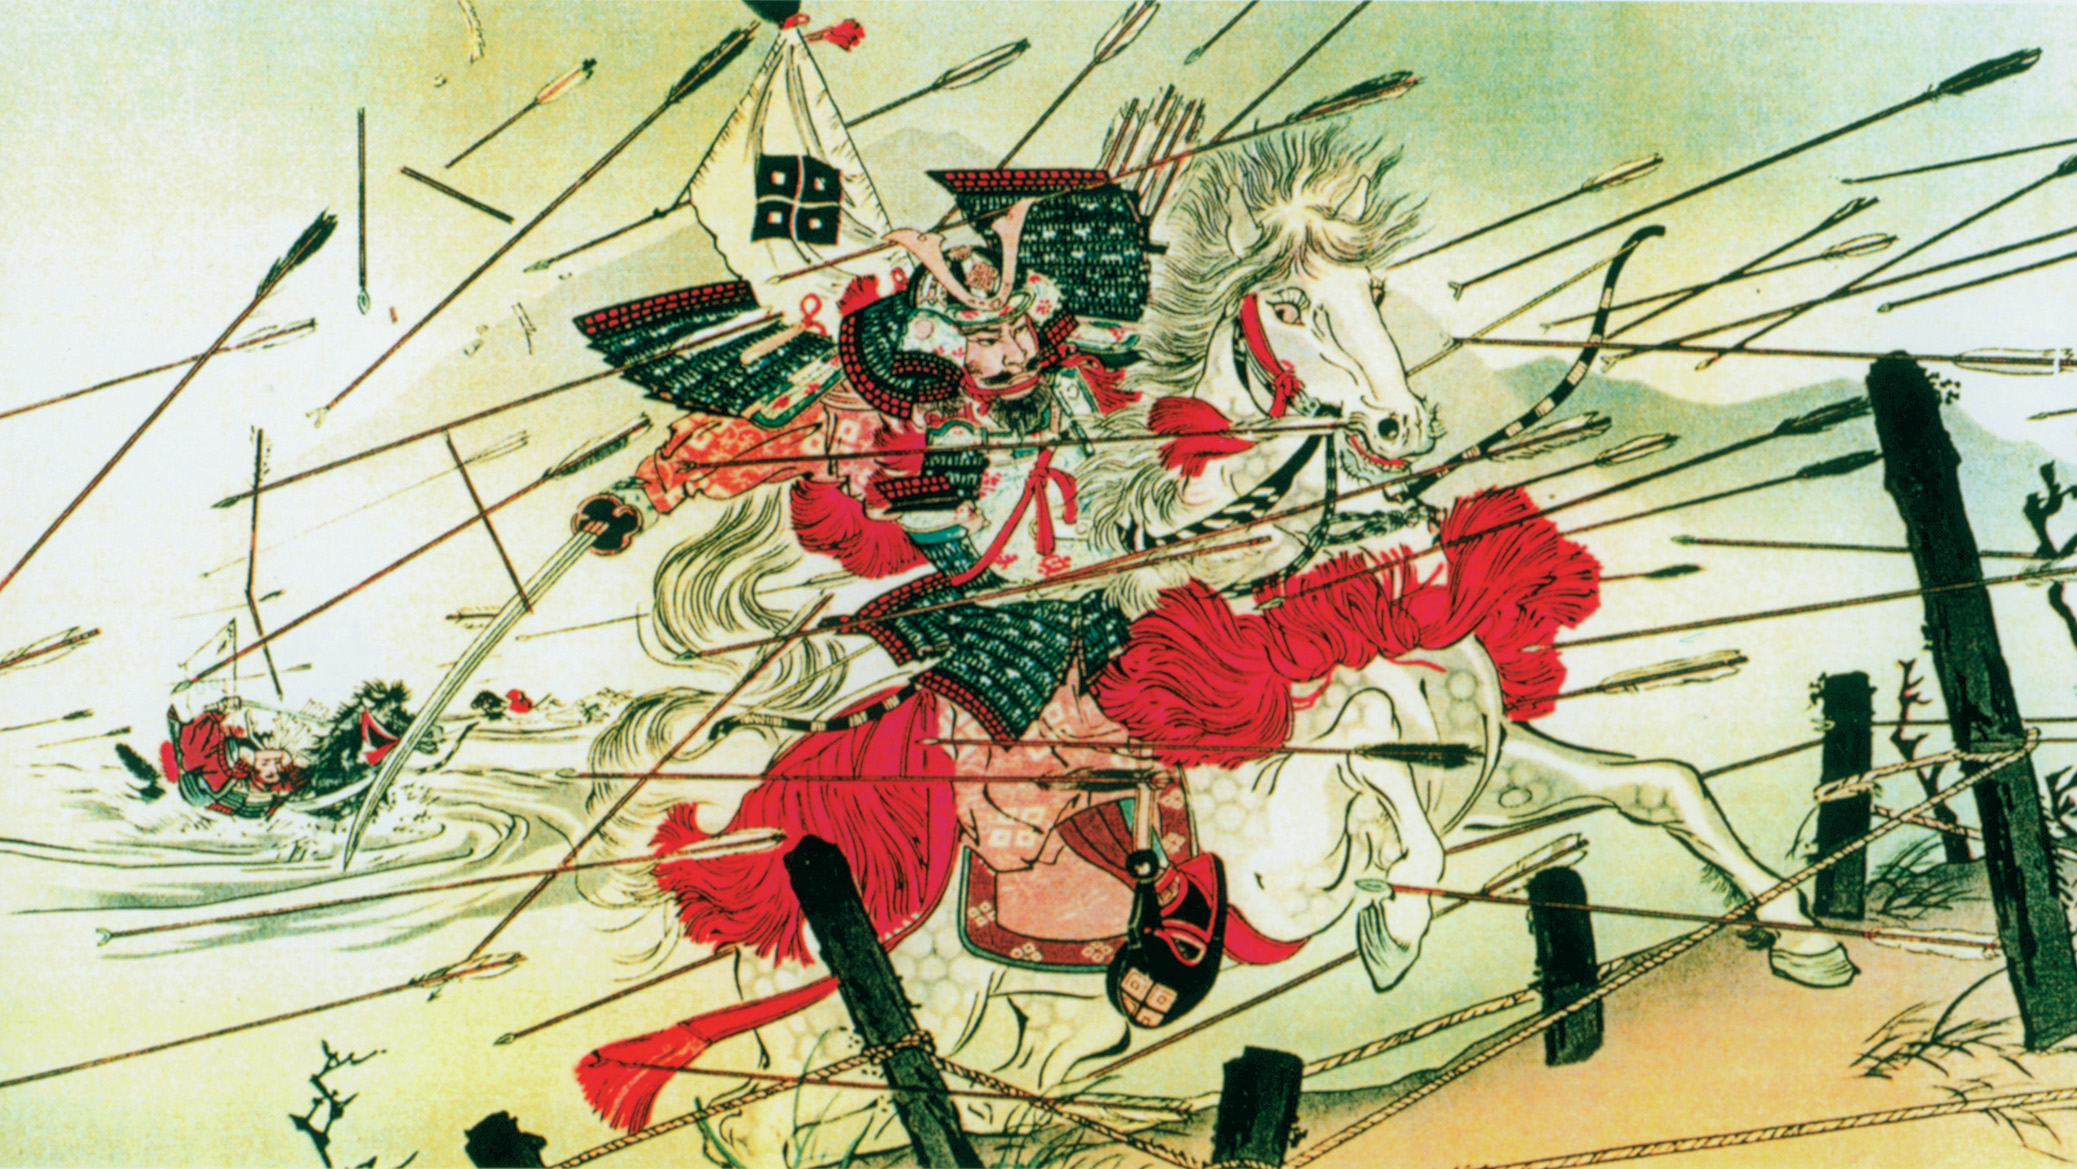 A samurai and his horse bound up the bank of a river to come to grips with the enemy. Precious sword in hand, the tsuba, or hand guard, is clearly visible. For hundreds of years great artistry was worked into the tsuba.